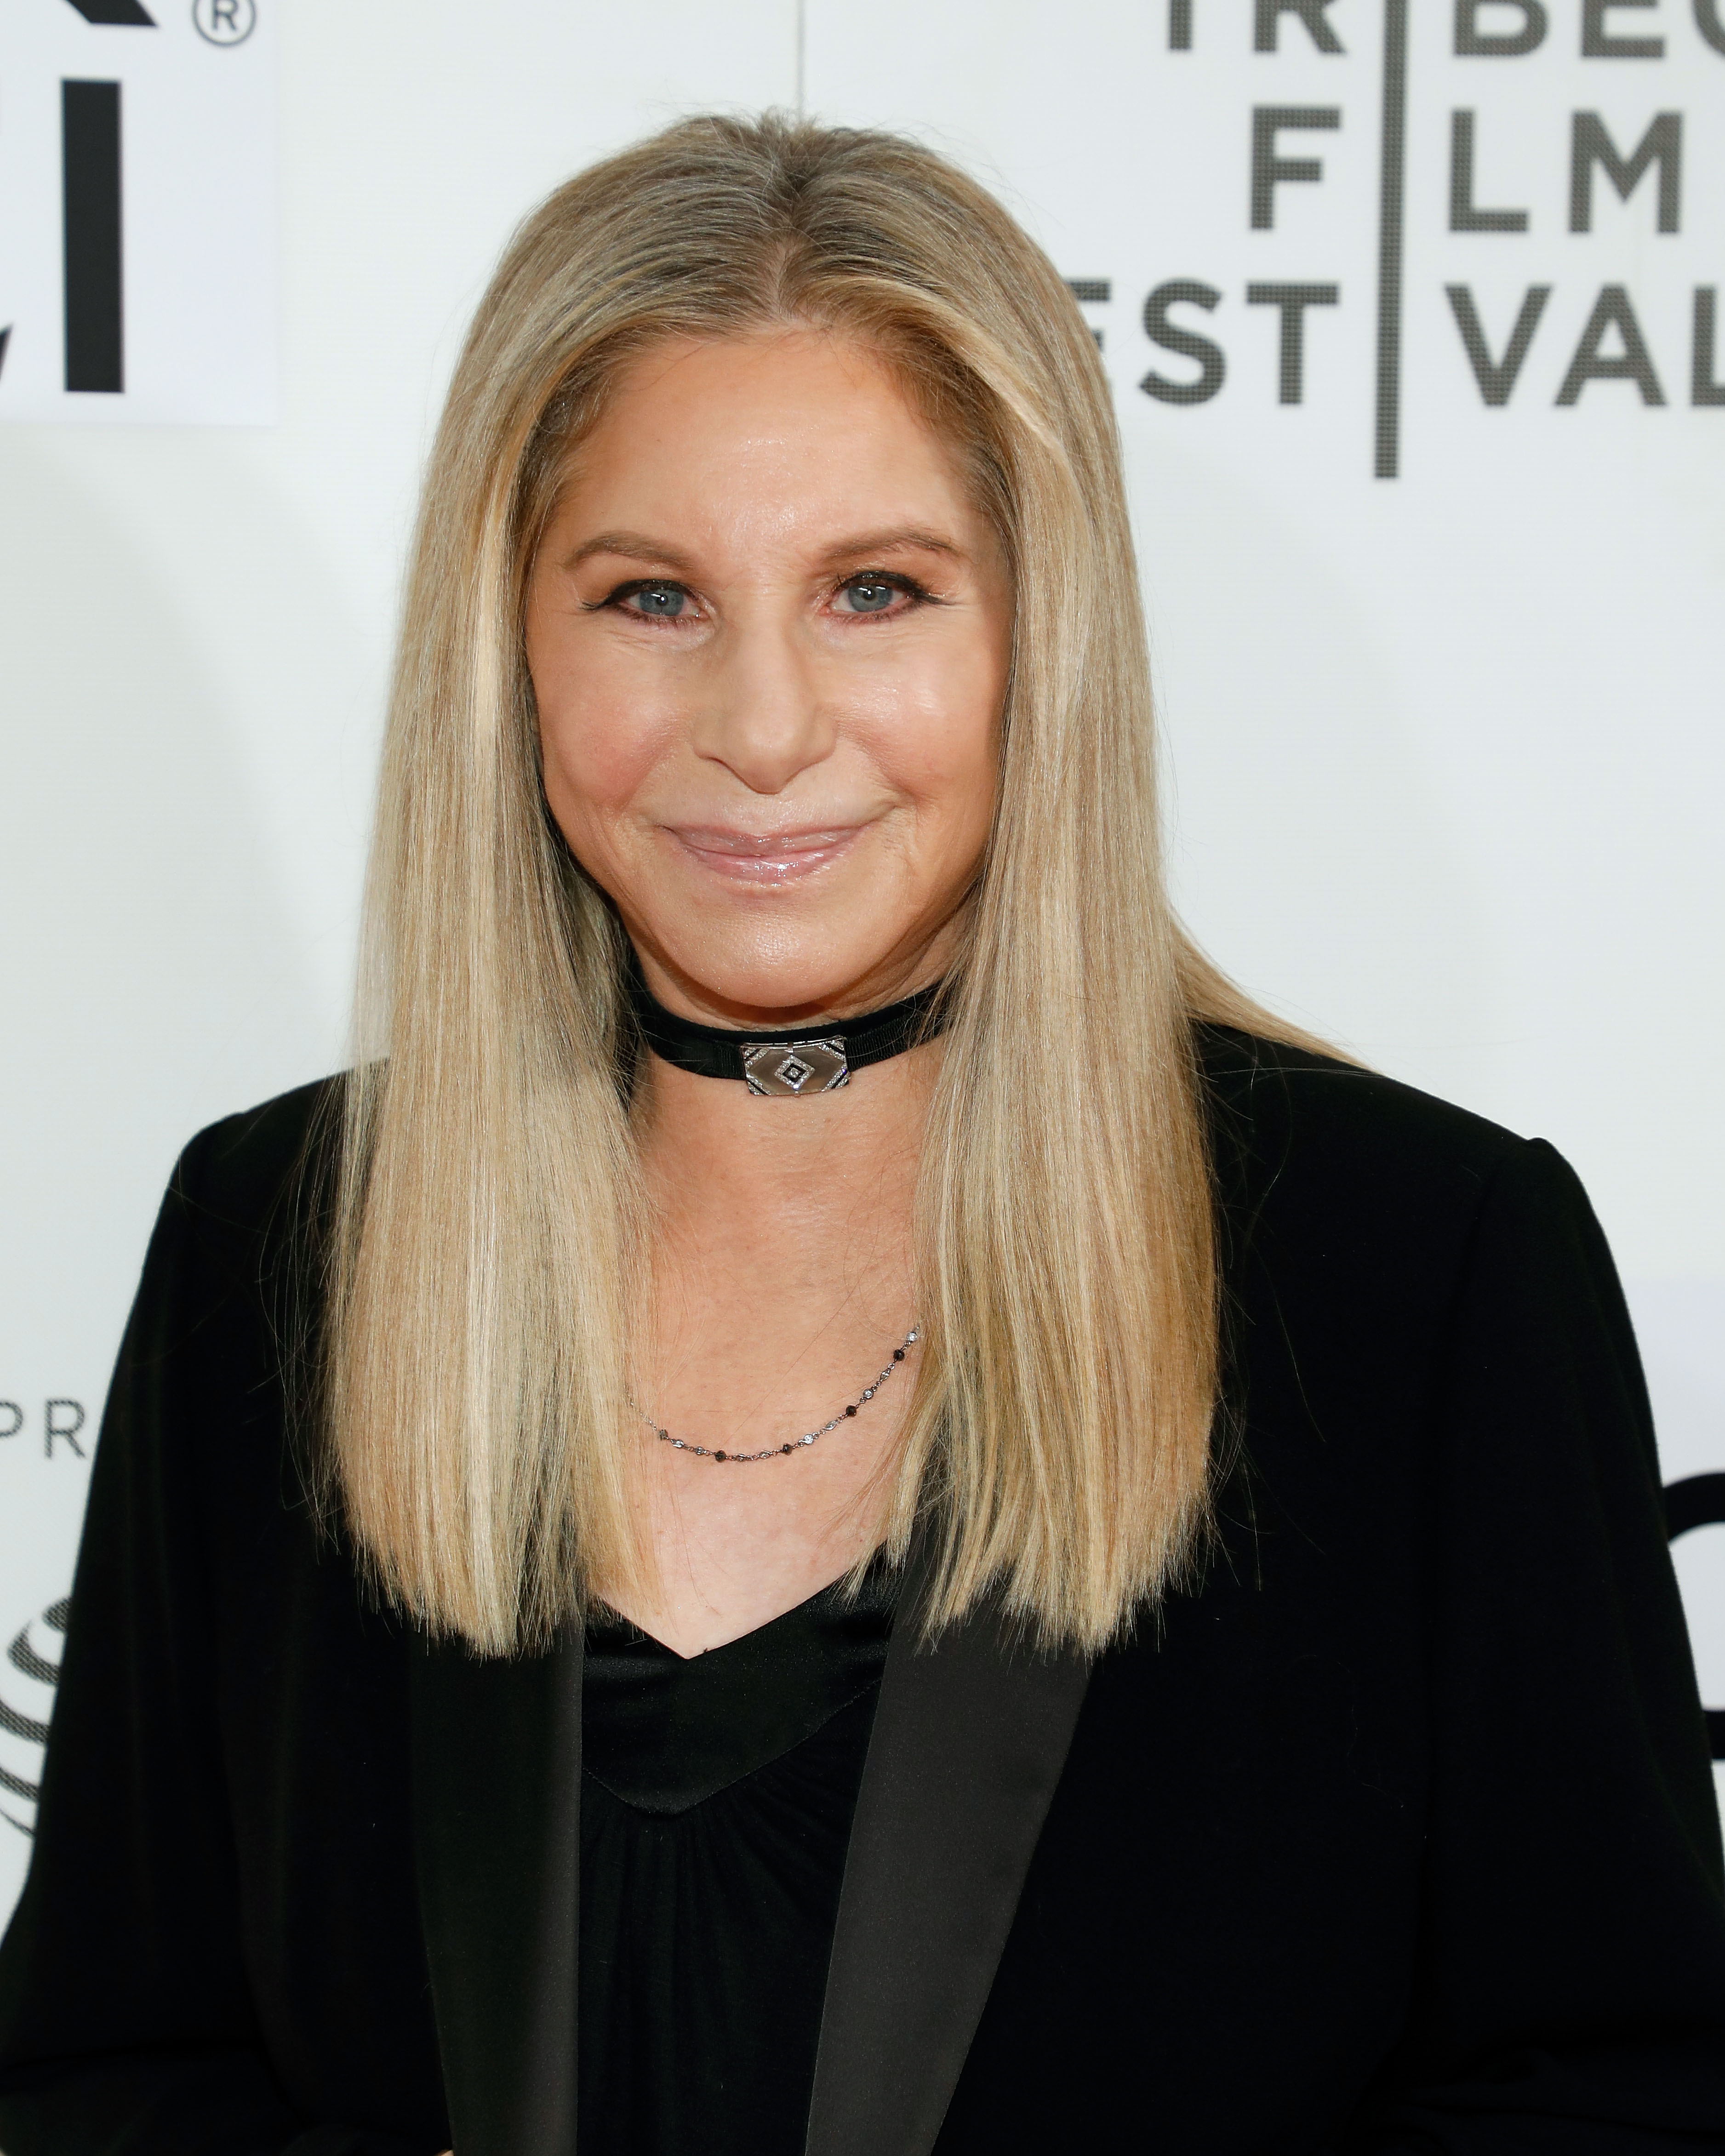 Barbra Streisand attends "Tribeca Talks: Storyteller" during the 2017 Tribeca Film Festival at Borough of Manhattan Community College on April 29, 2017 in New York City. | Source: Getty Images